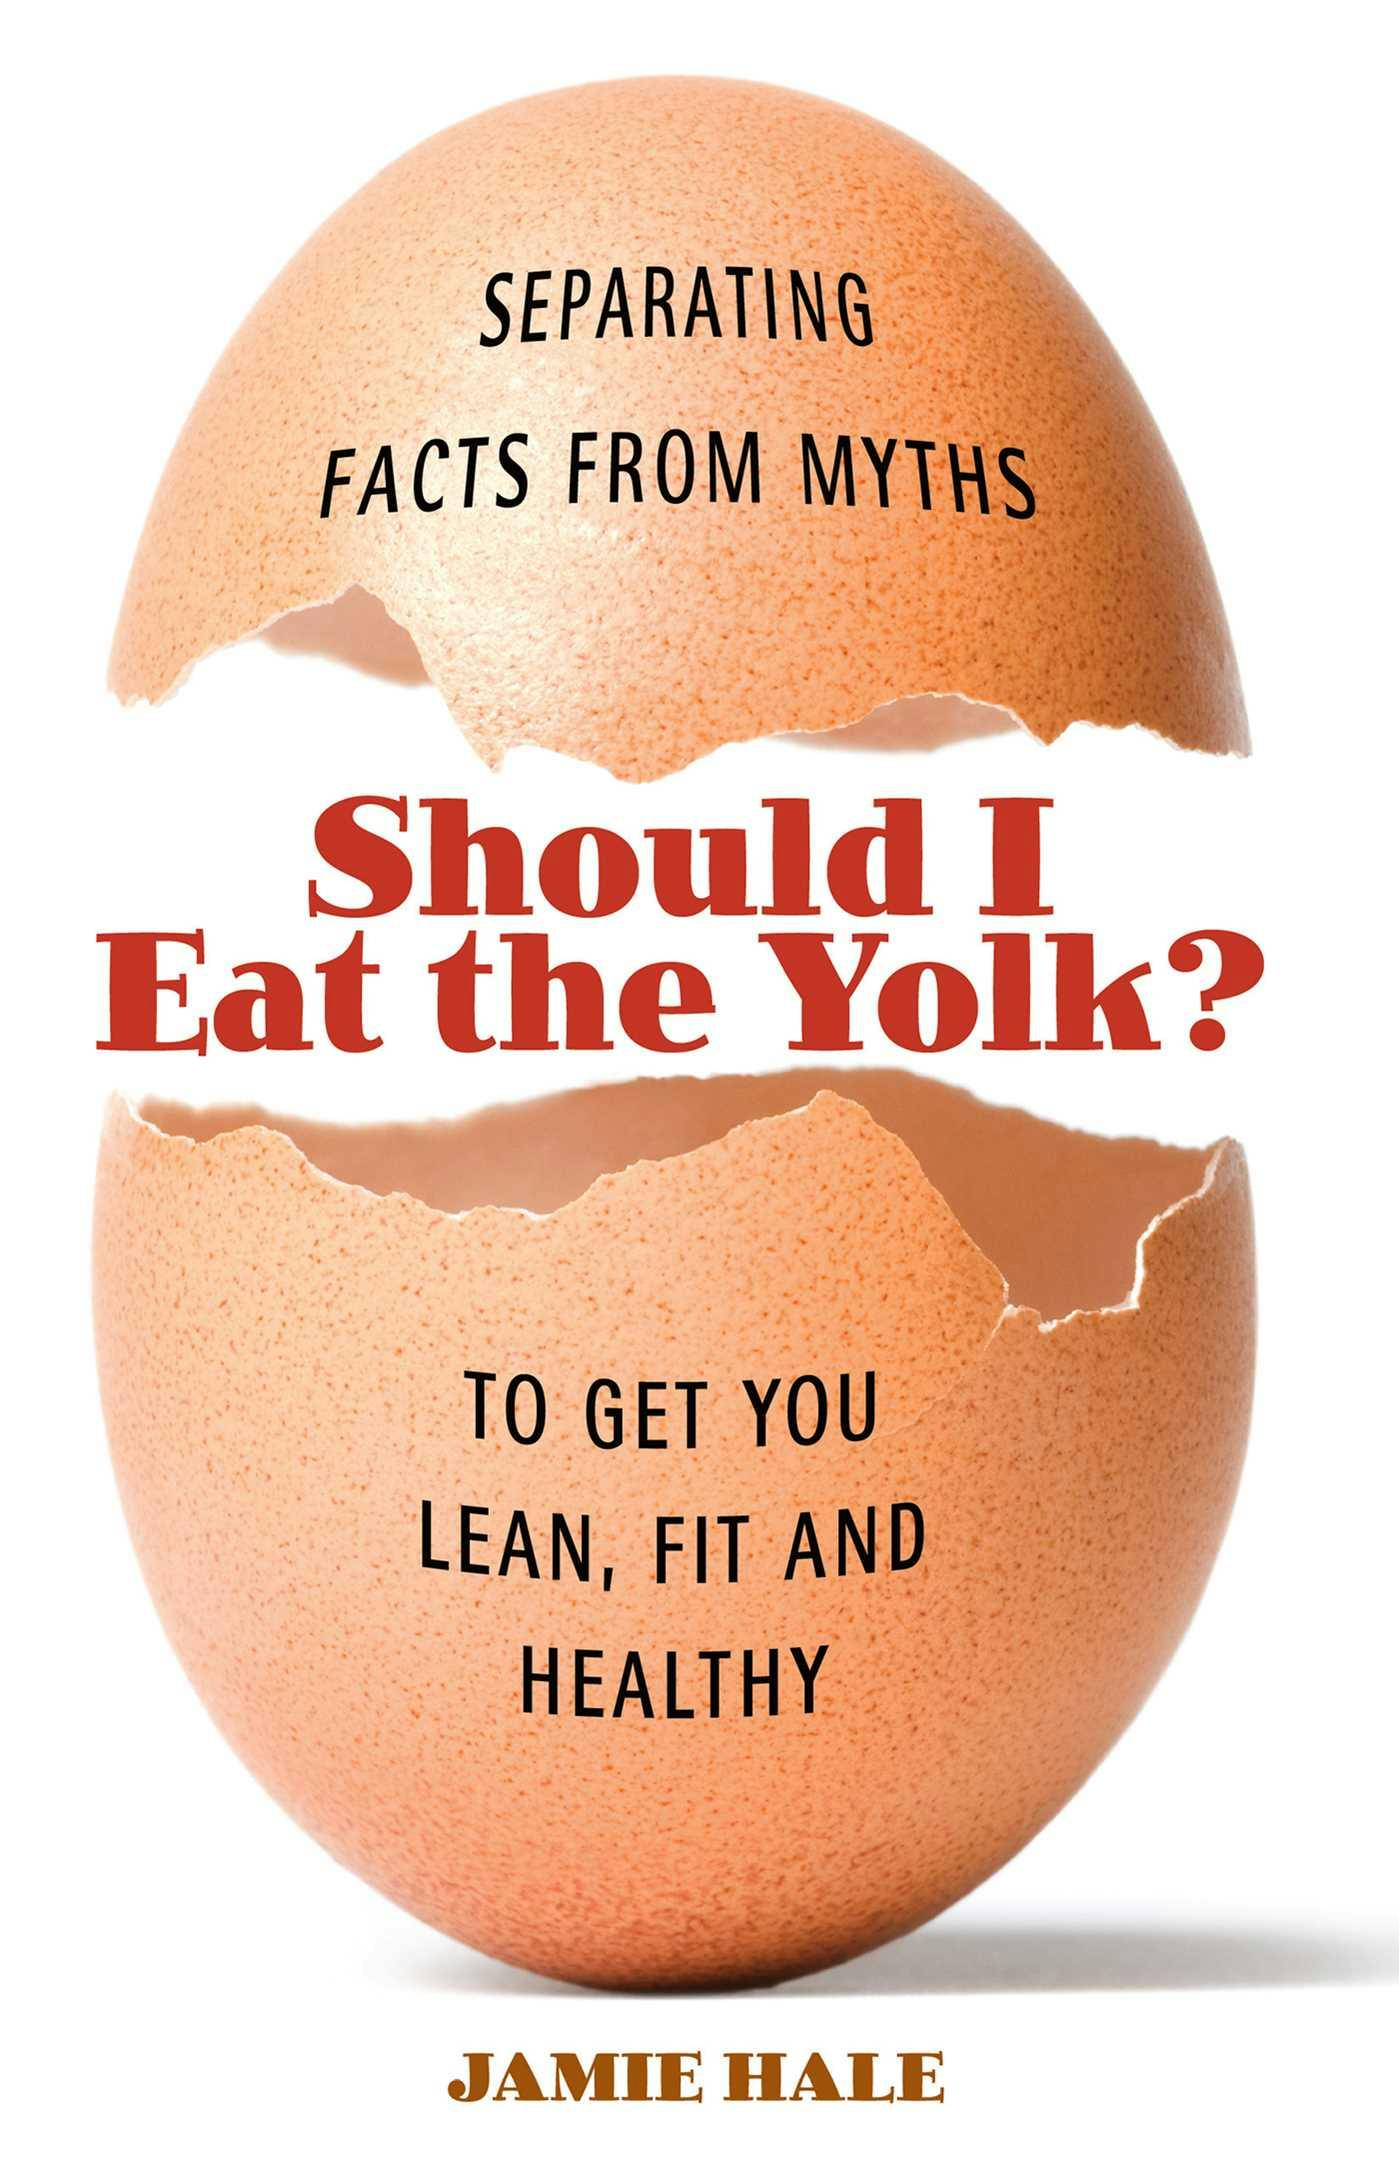 Should I Eat the Yolk?: Separating Facts from Myths to Get You Lean, Fit, and Healthy - Jamie Hale